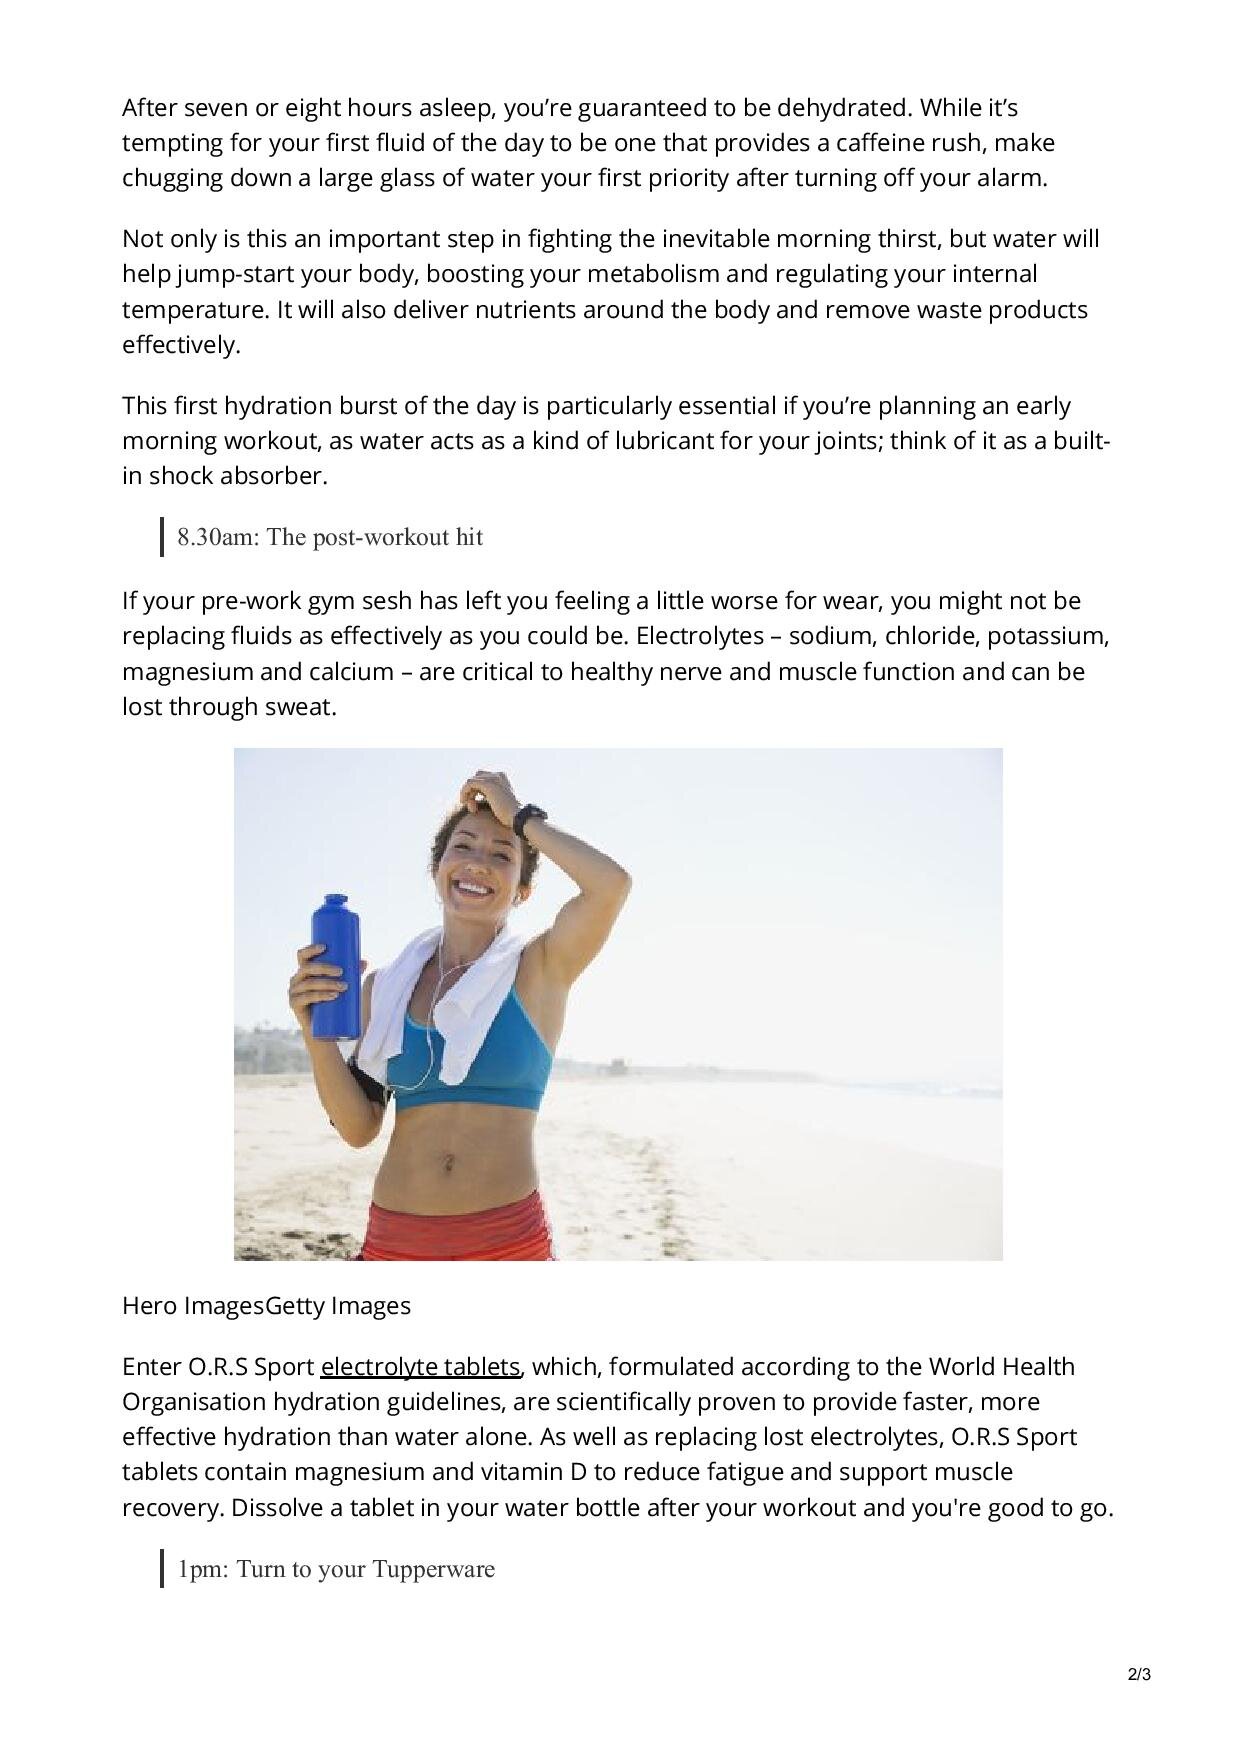 womenshealthmag.com-5 Hydration Tips That Will Really Tackle Your Tiredness-page-002.jpg